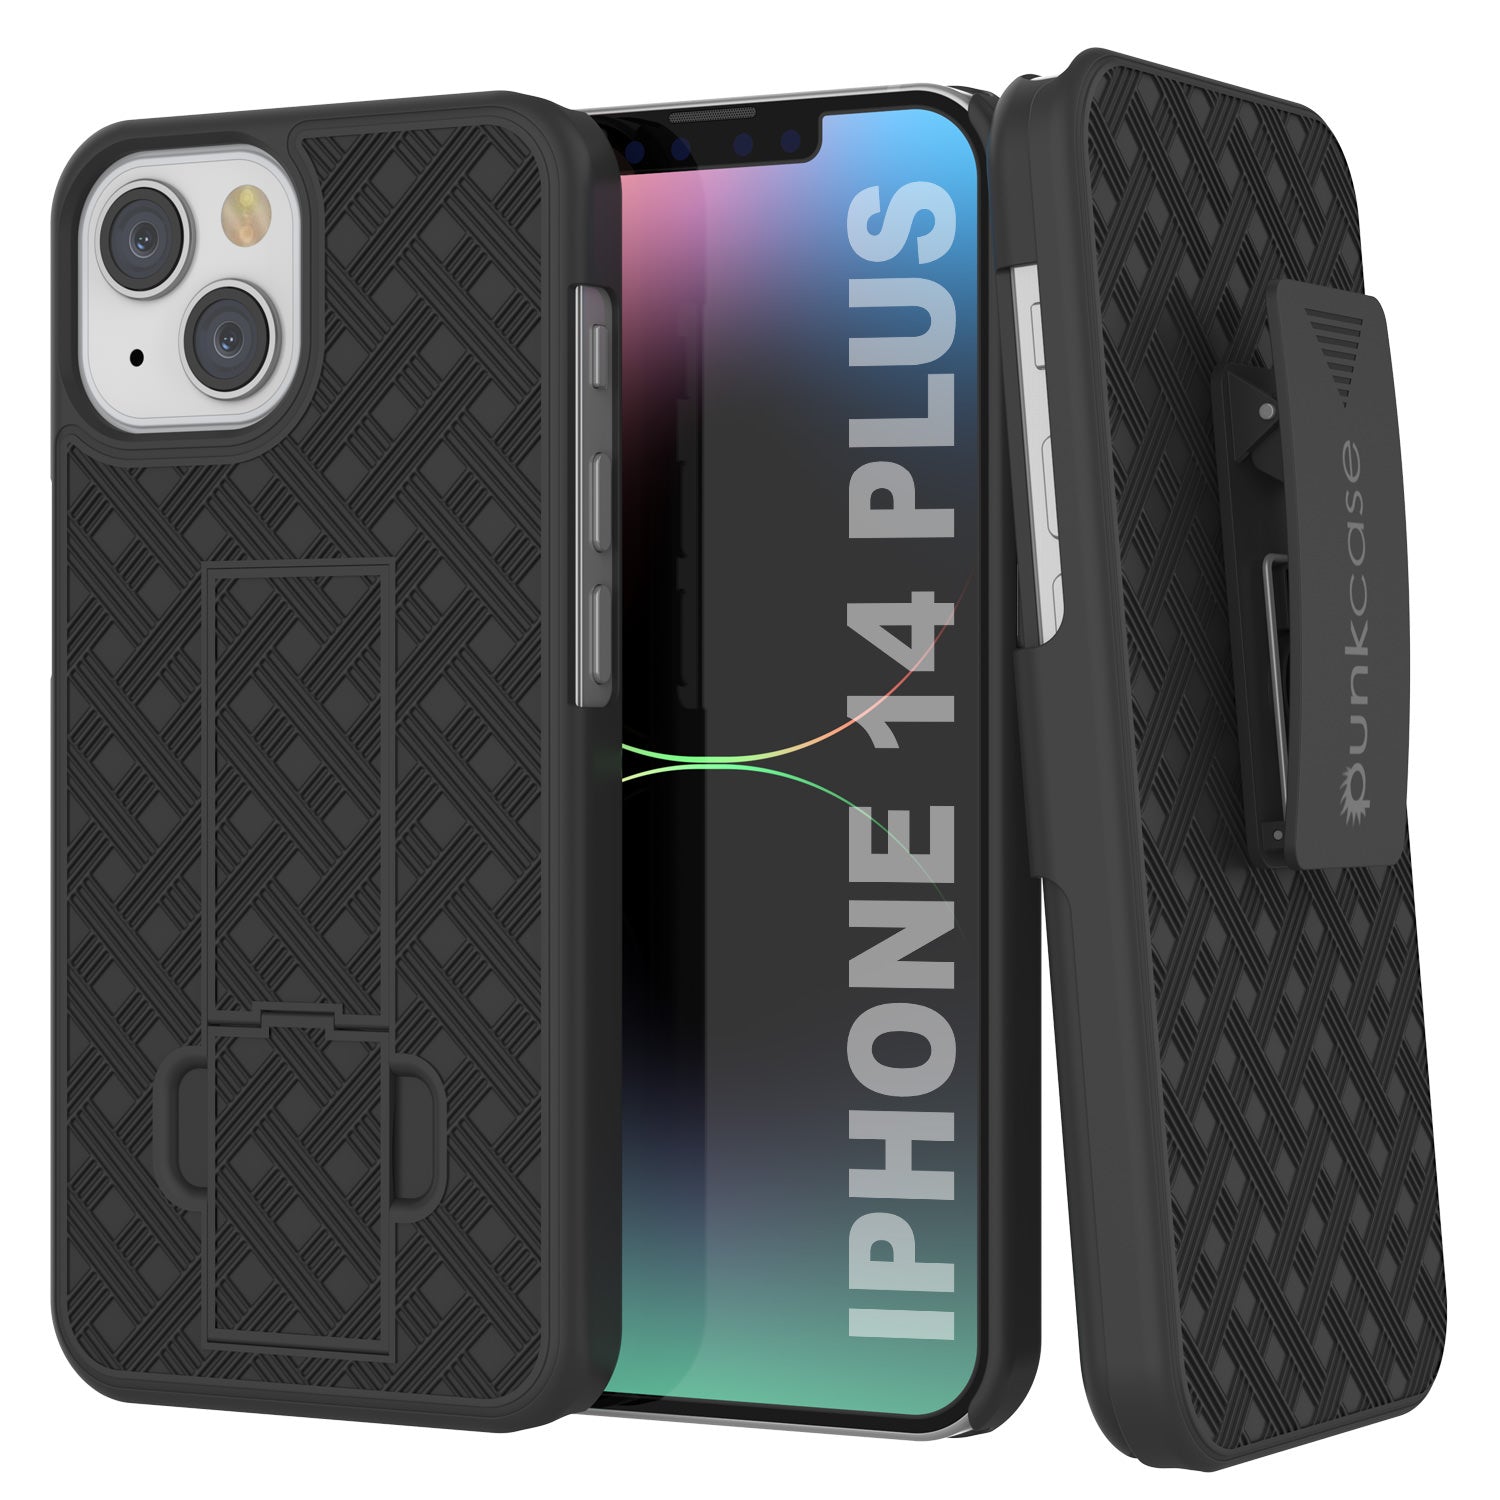 Punkcase iPhone 14 Plus Case With Tempered Glass Screen Protector, Holster Belt Clip & Built-In Kickstand [Black]